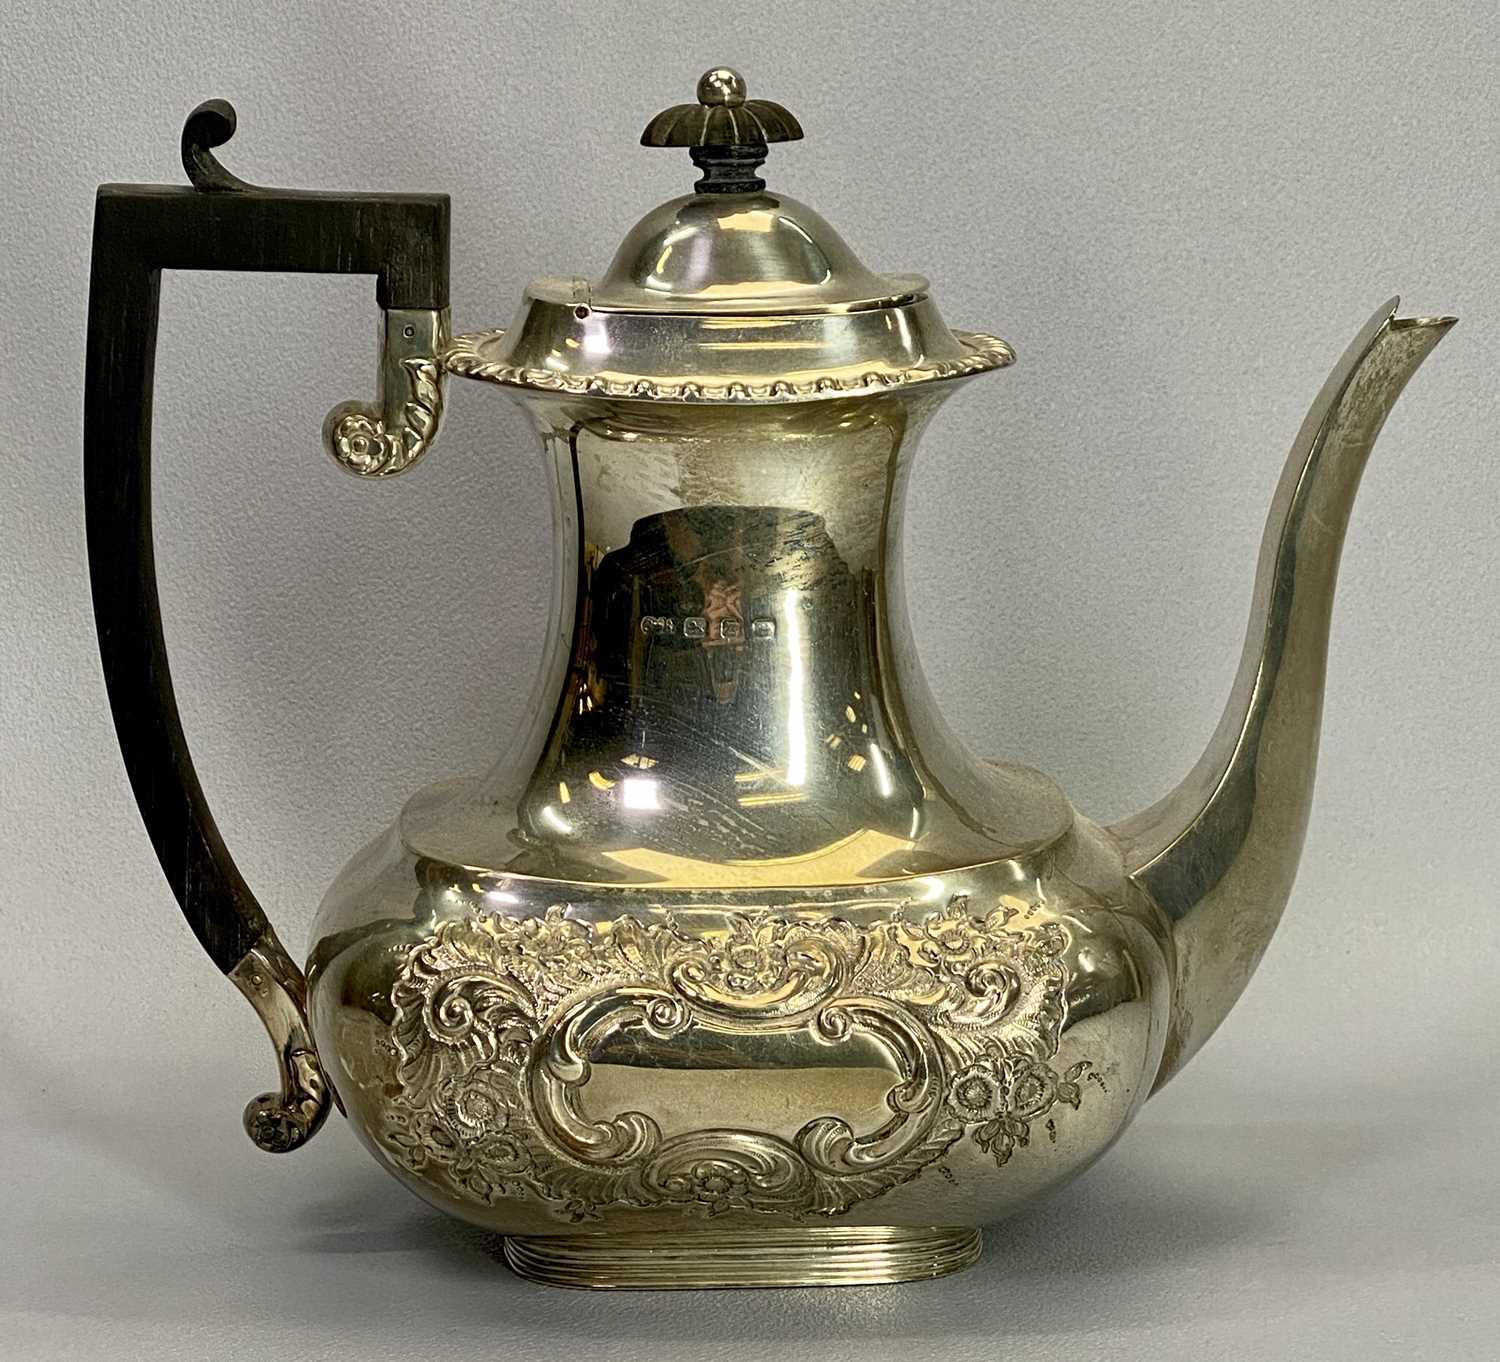 BIRMINGHAM VICTORIAN SILVER TEAPOT 1899 - Maker Synyer & Beddoes, waisted form with floral